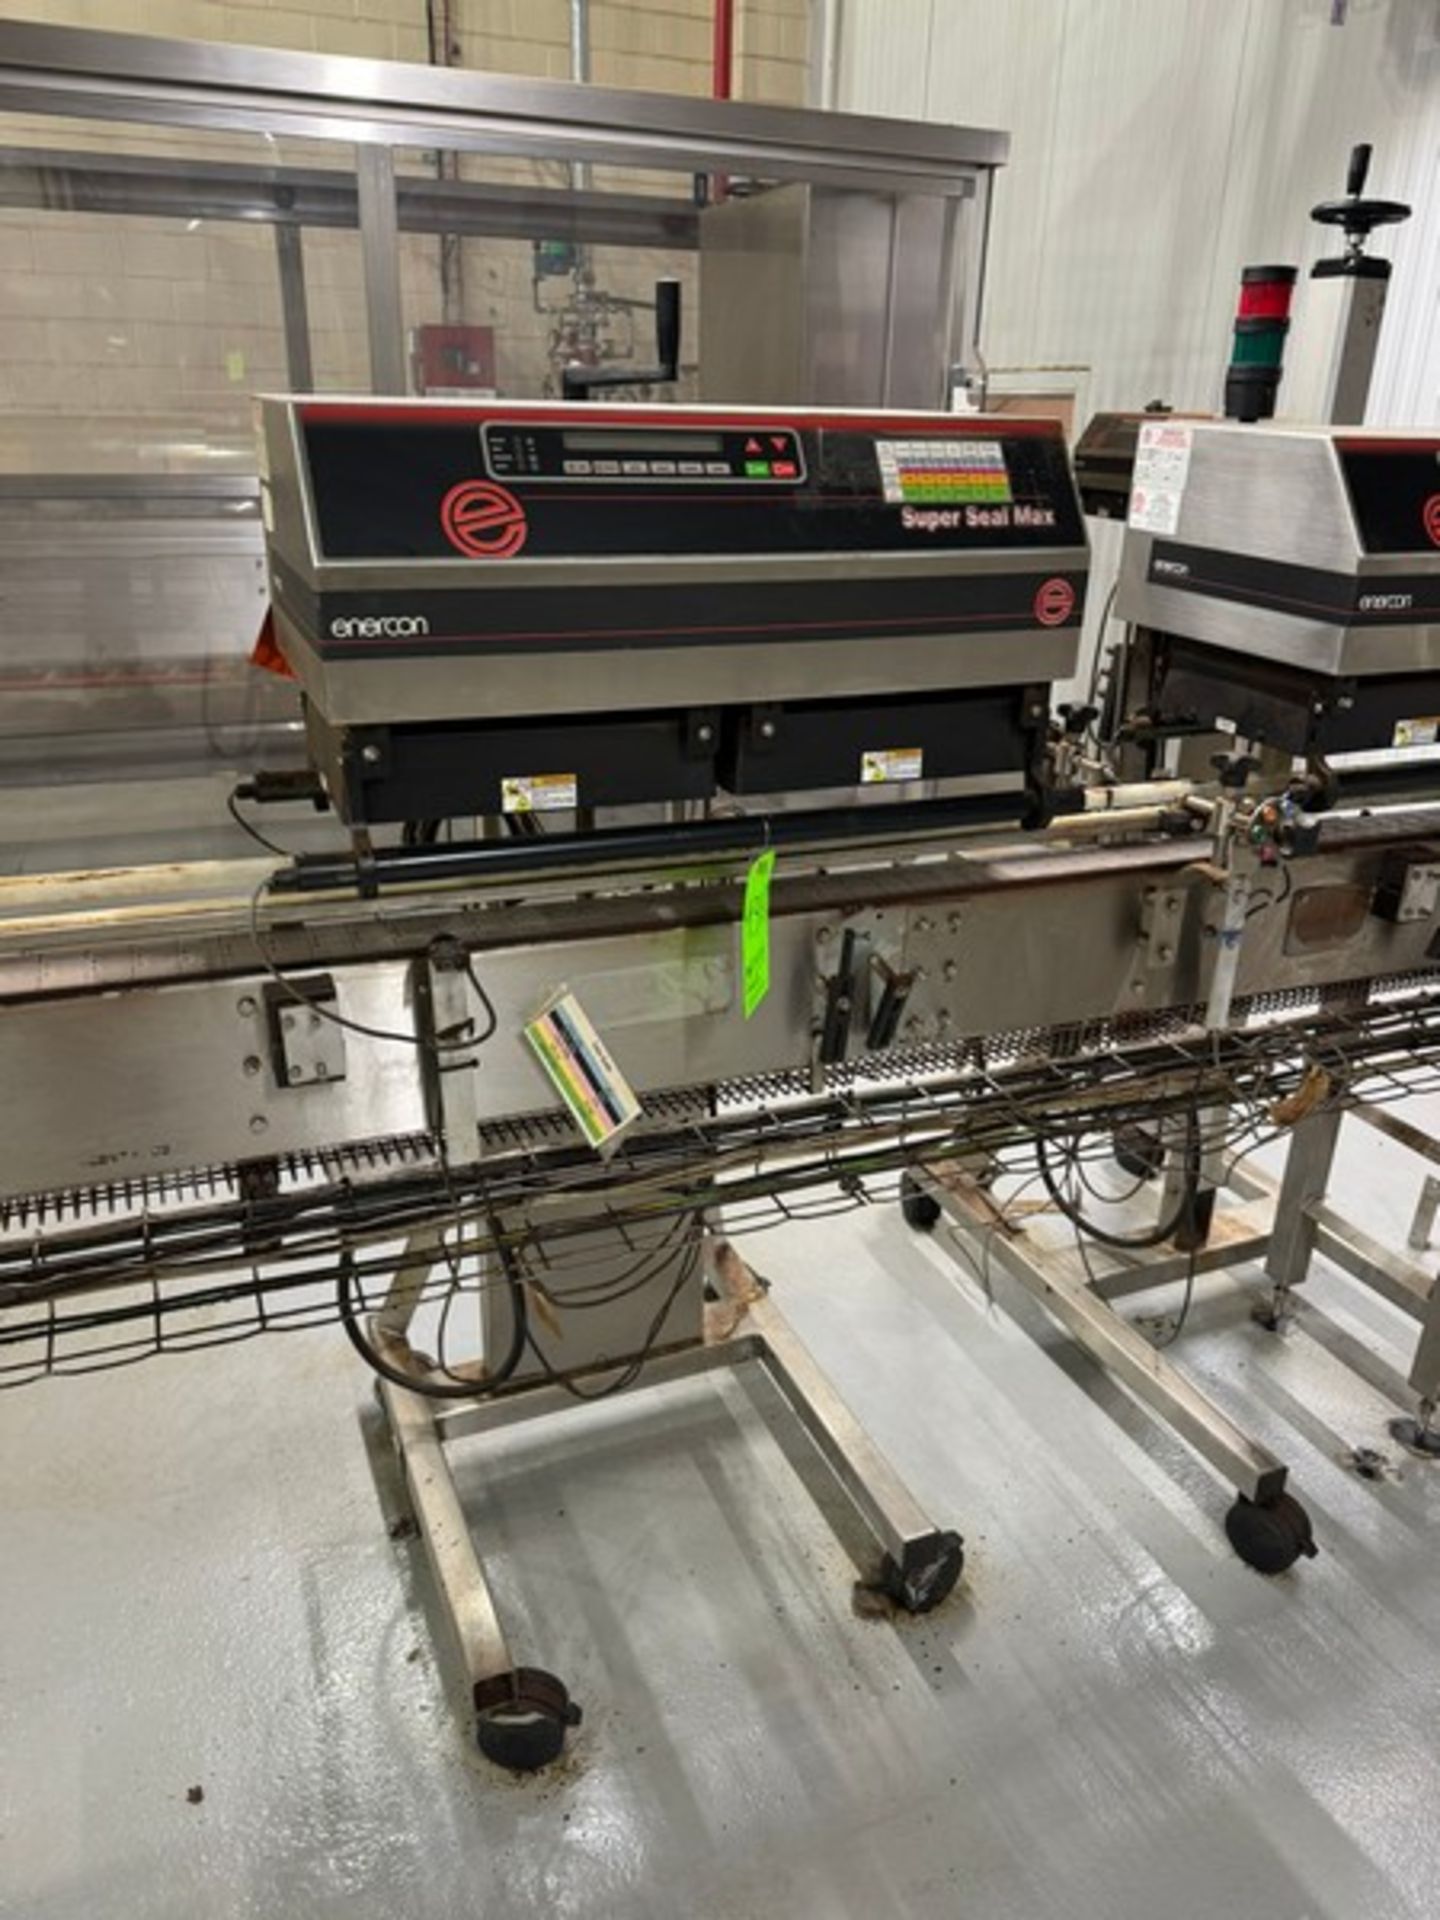 2014 Emerson Superseal Max Sealer, M/N LM4989-46, S/N 111756-1-1, 208 Volts, Mounted on Portable